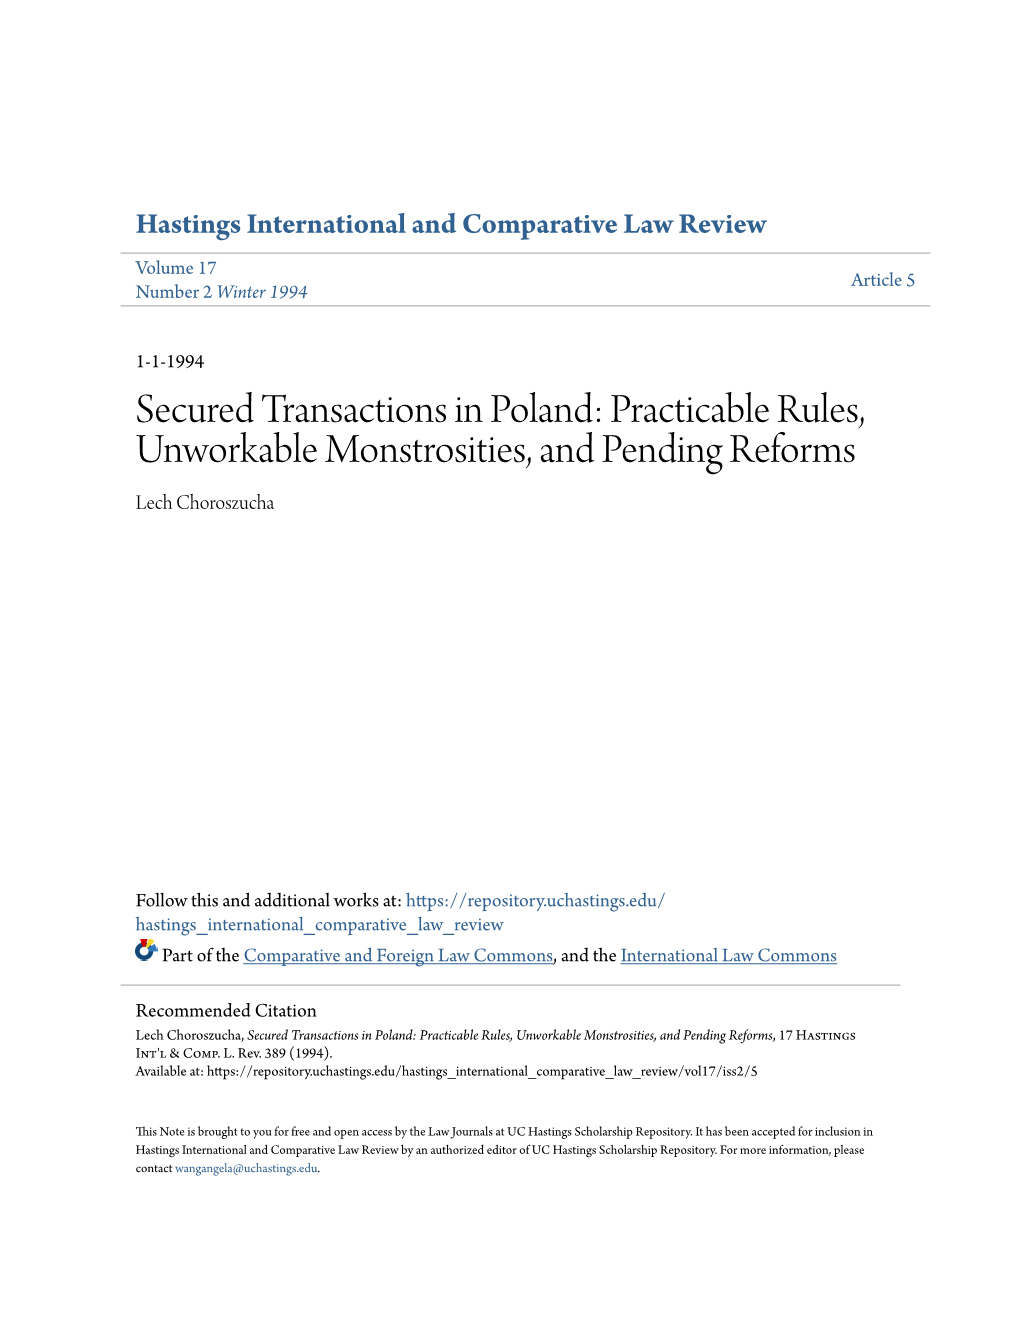 Secured Transactions in Poland: Practicable Rules, Unworkable Monstrosities, and Pending Reforms Lech Choroszucha